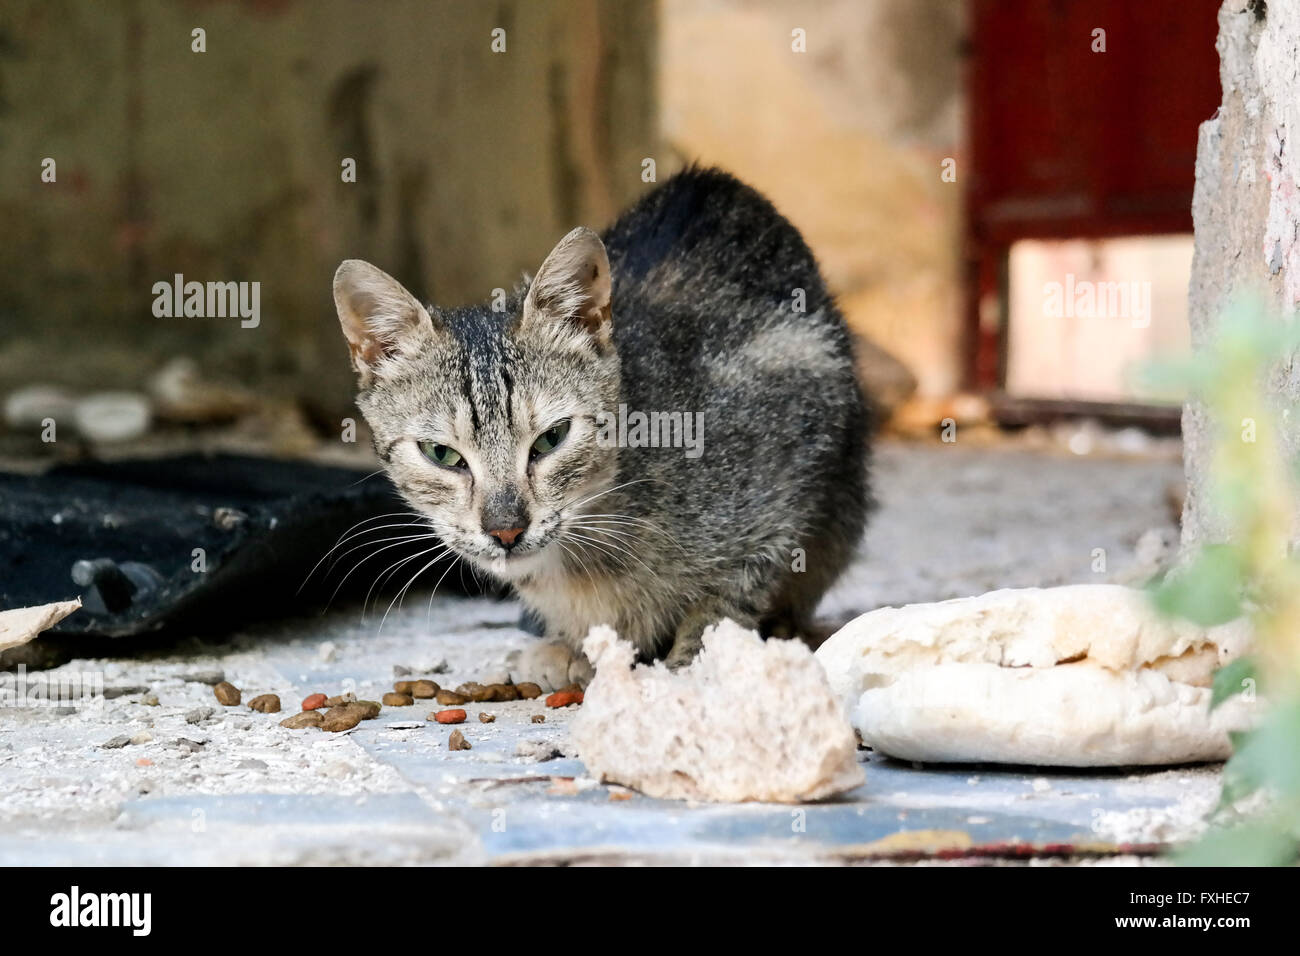 Street cat eating in a ruined house in Mostar. Stock Photo